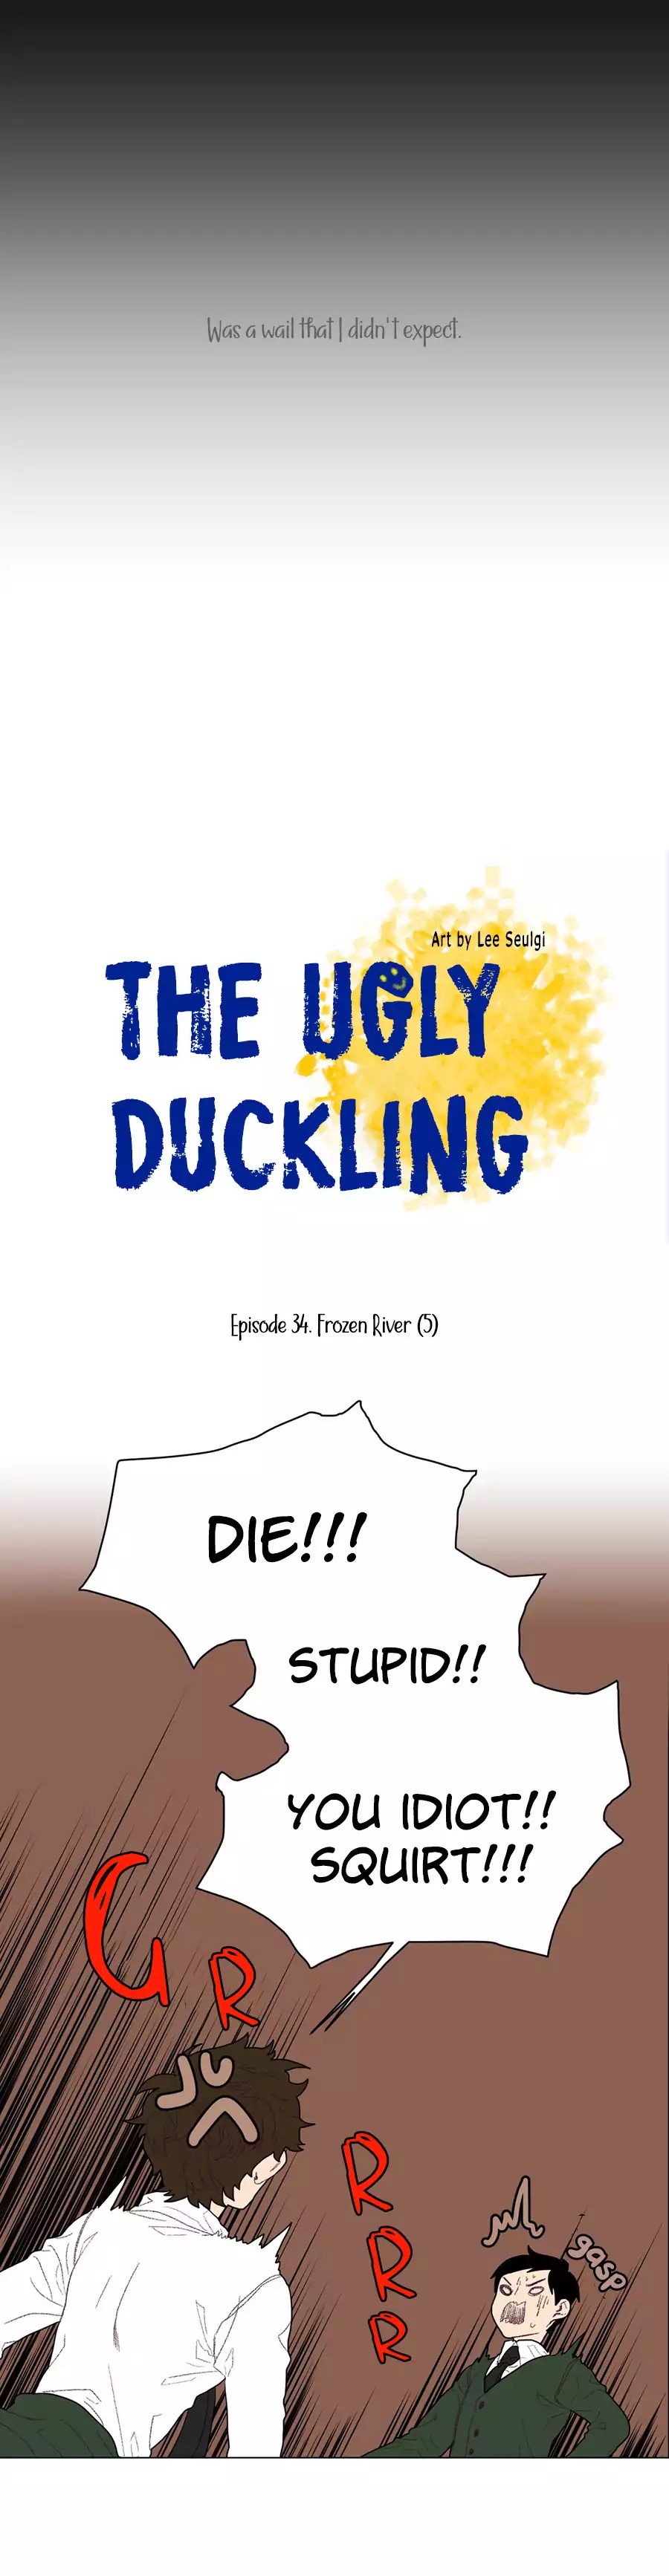 ugly_duckling_34_3